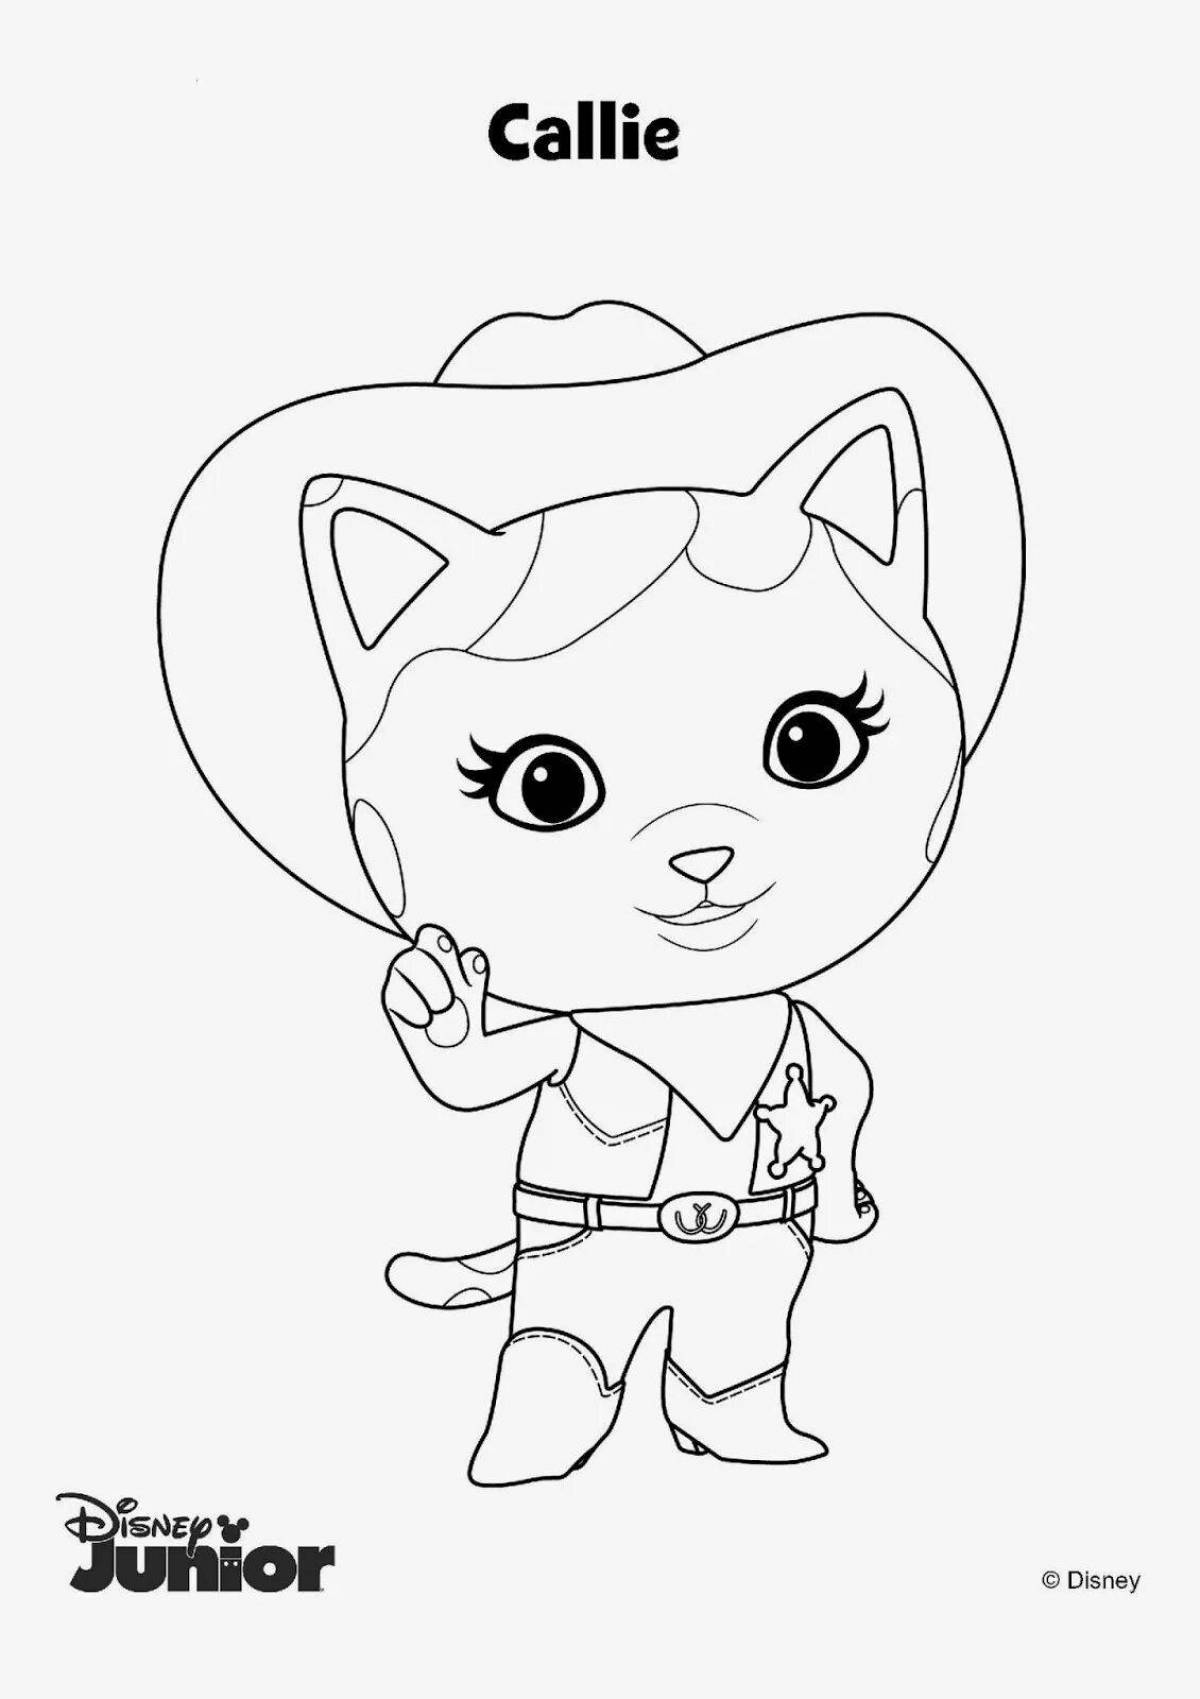 Amazing sheriff coloring page